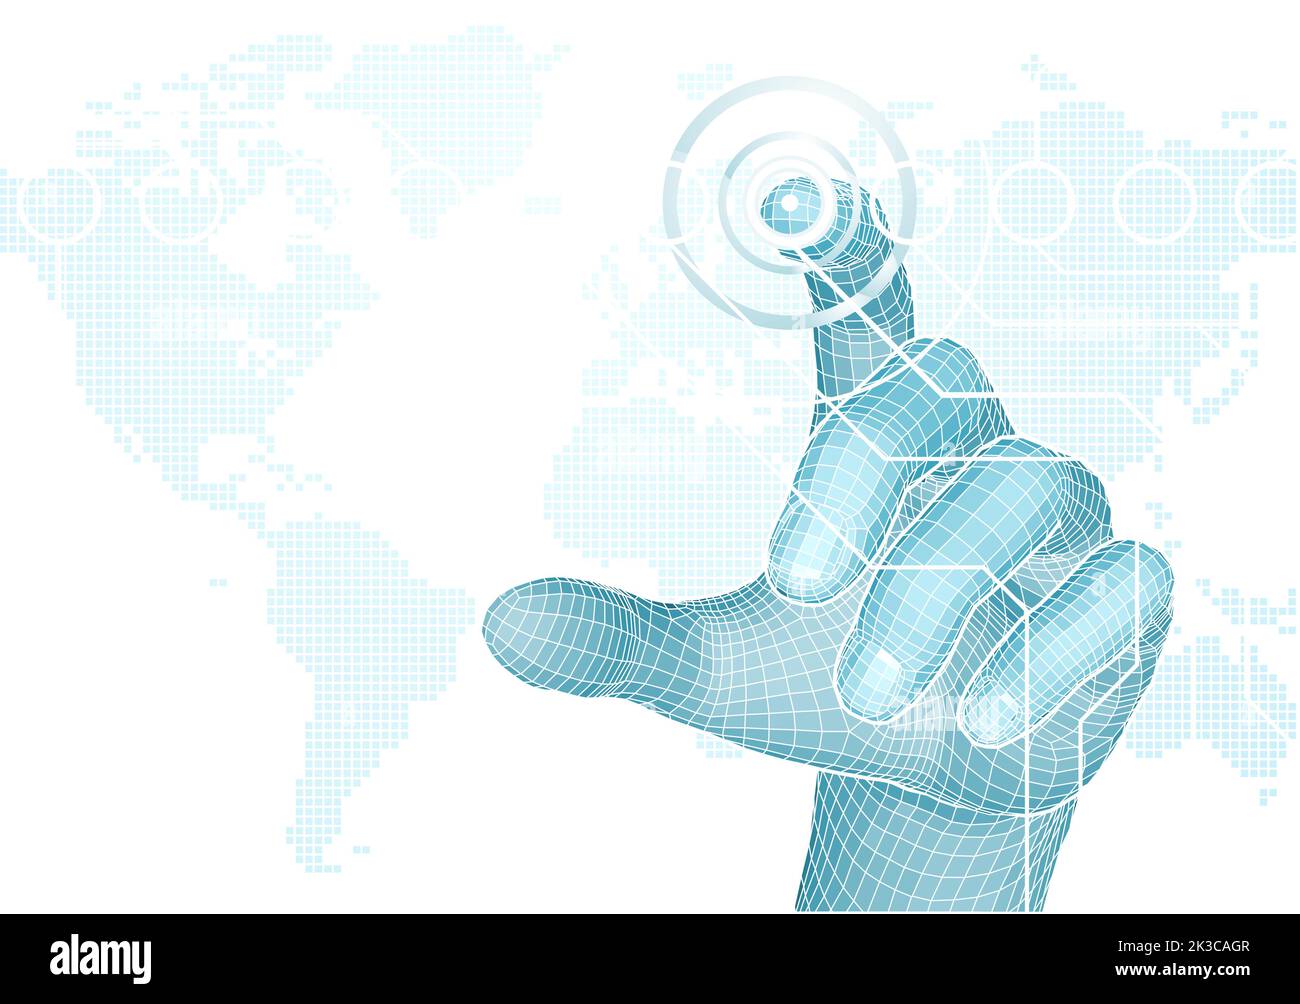 Hand Selecting 3D World Technology Concept Stock Vector